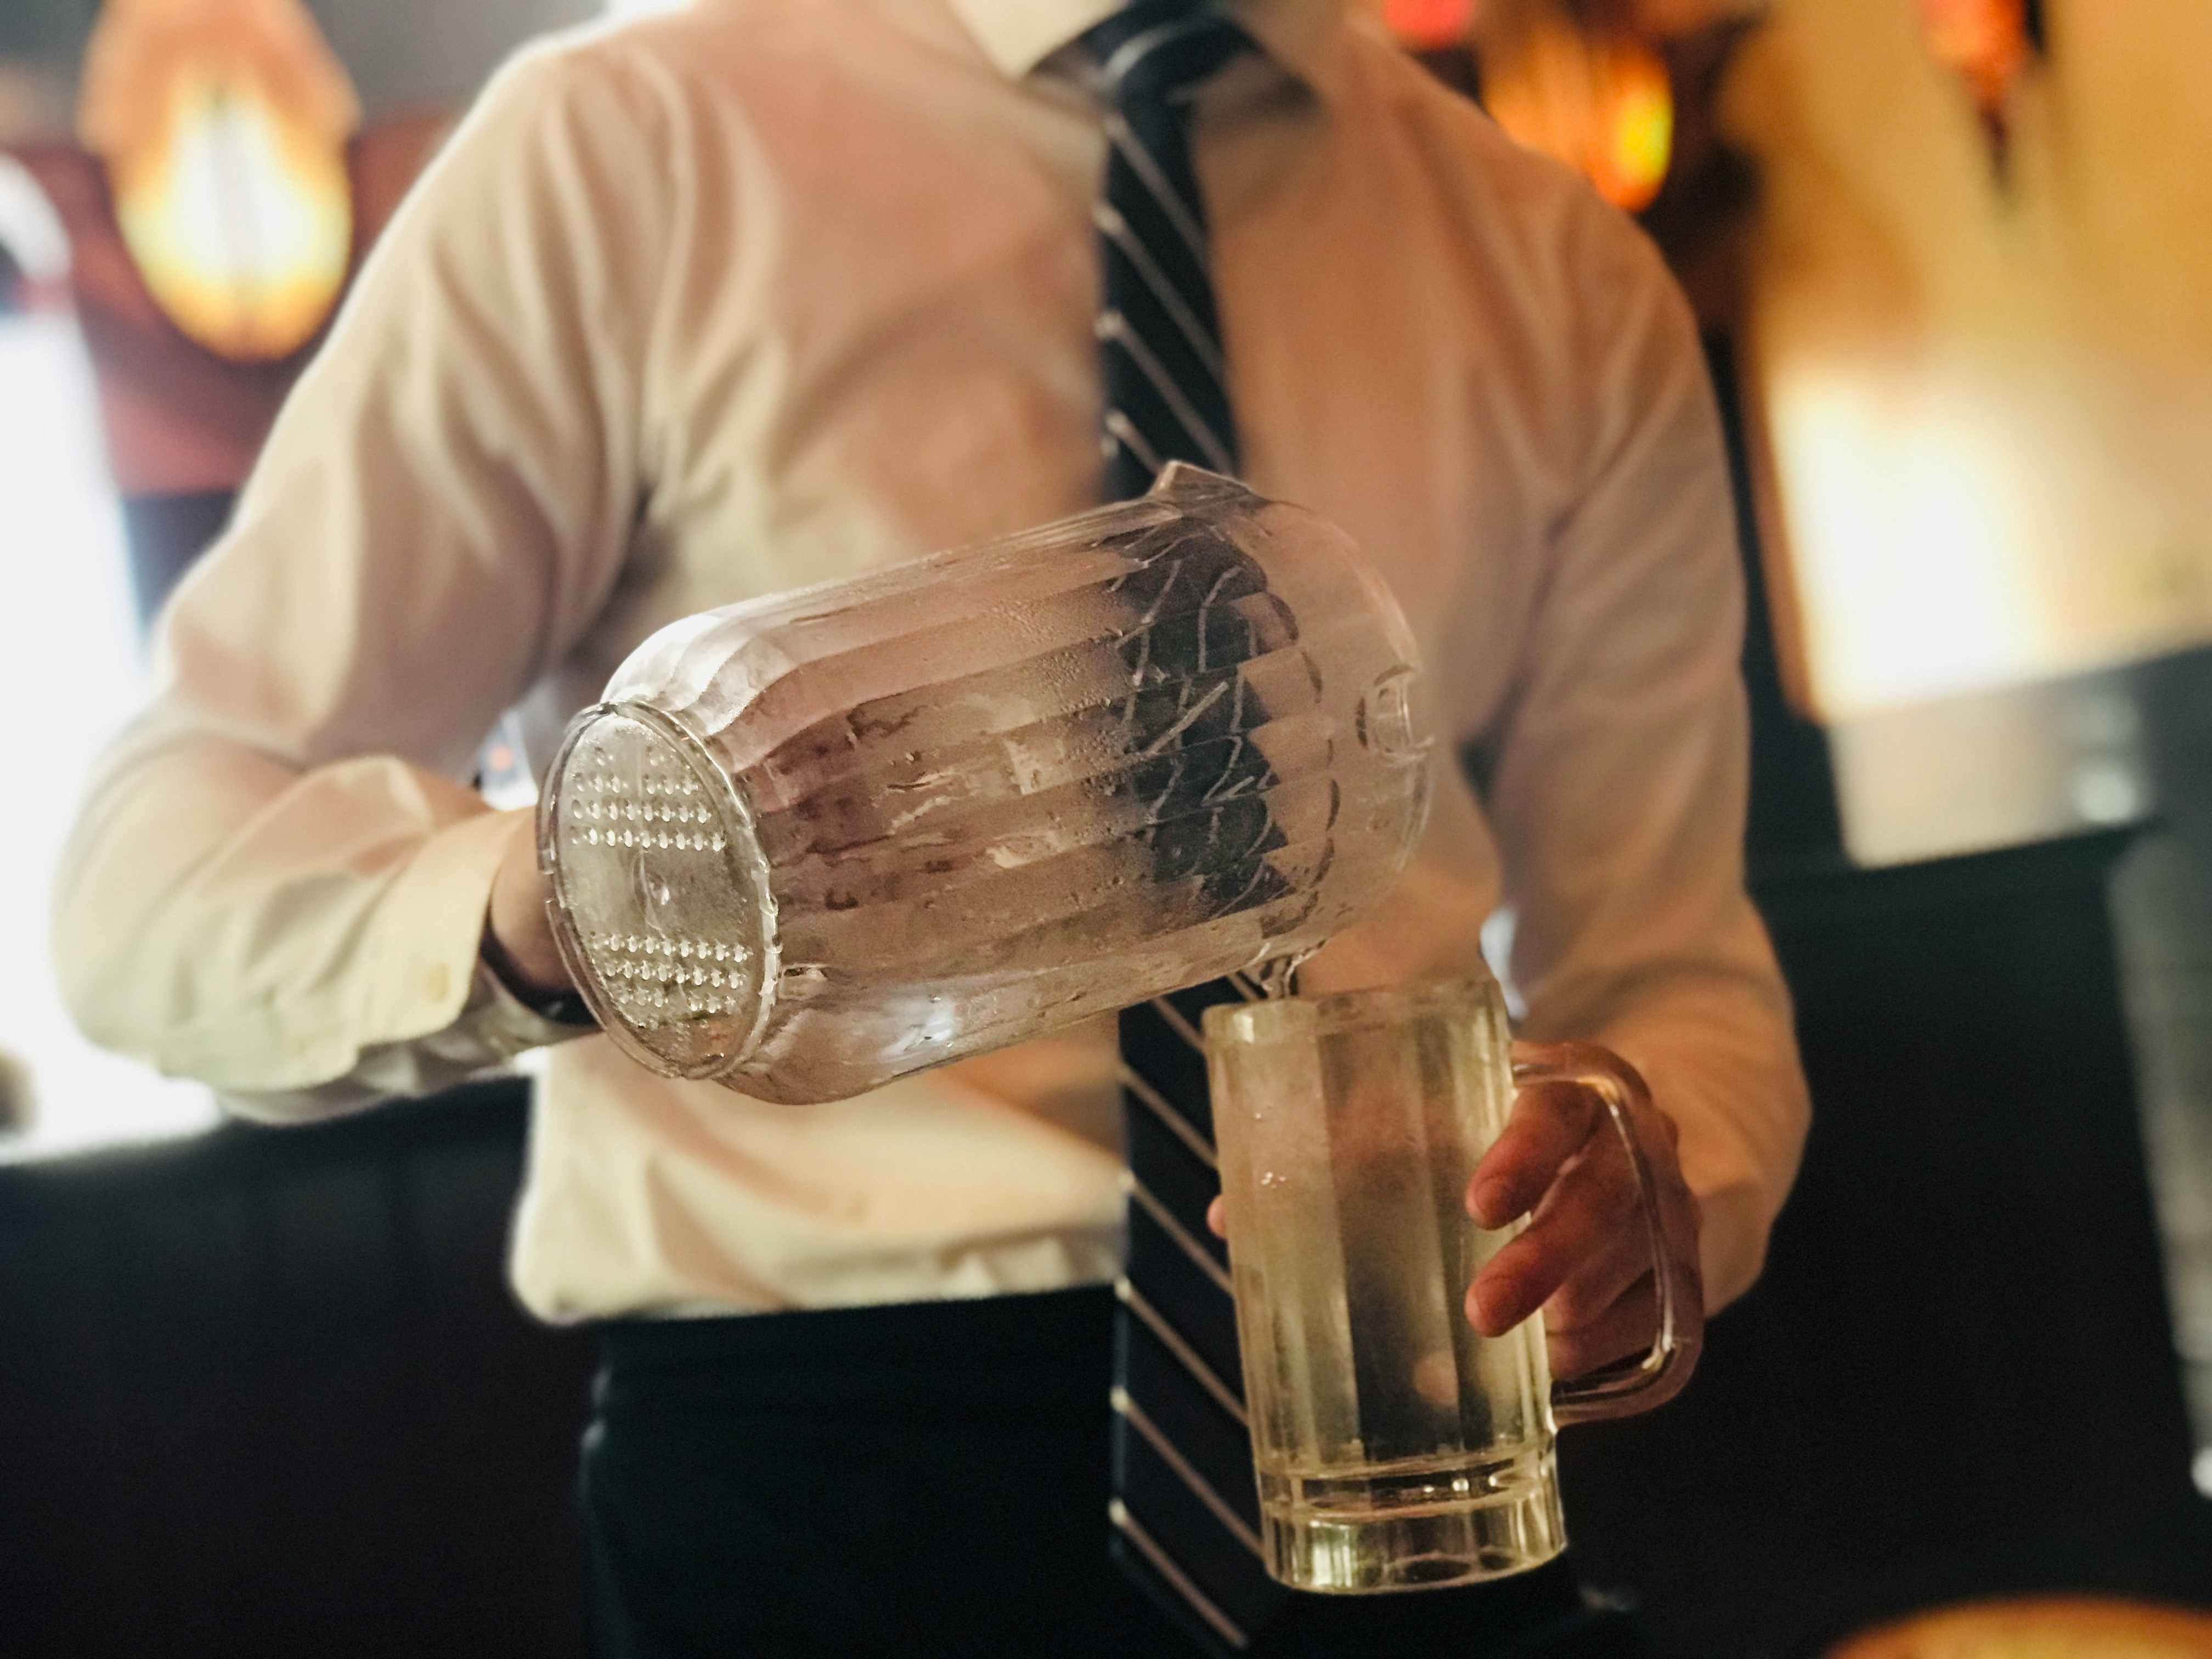 A server pouring water from a pitcher into a glass at a table in The Cheesecake Factory.